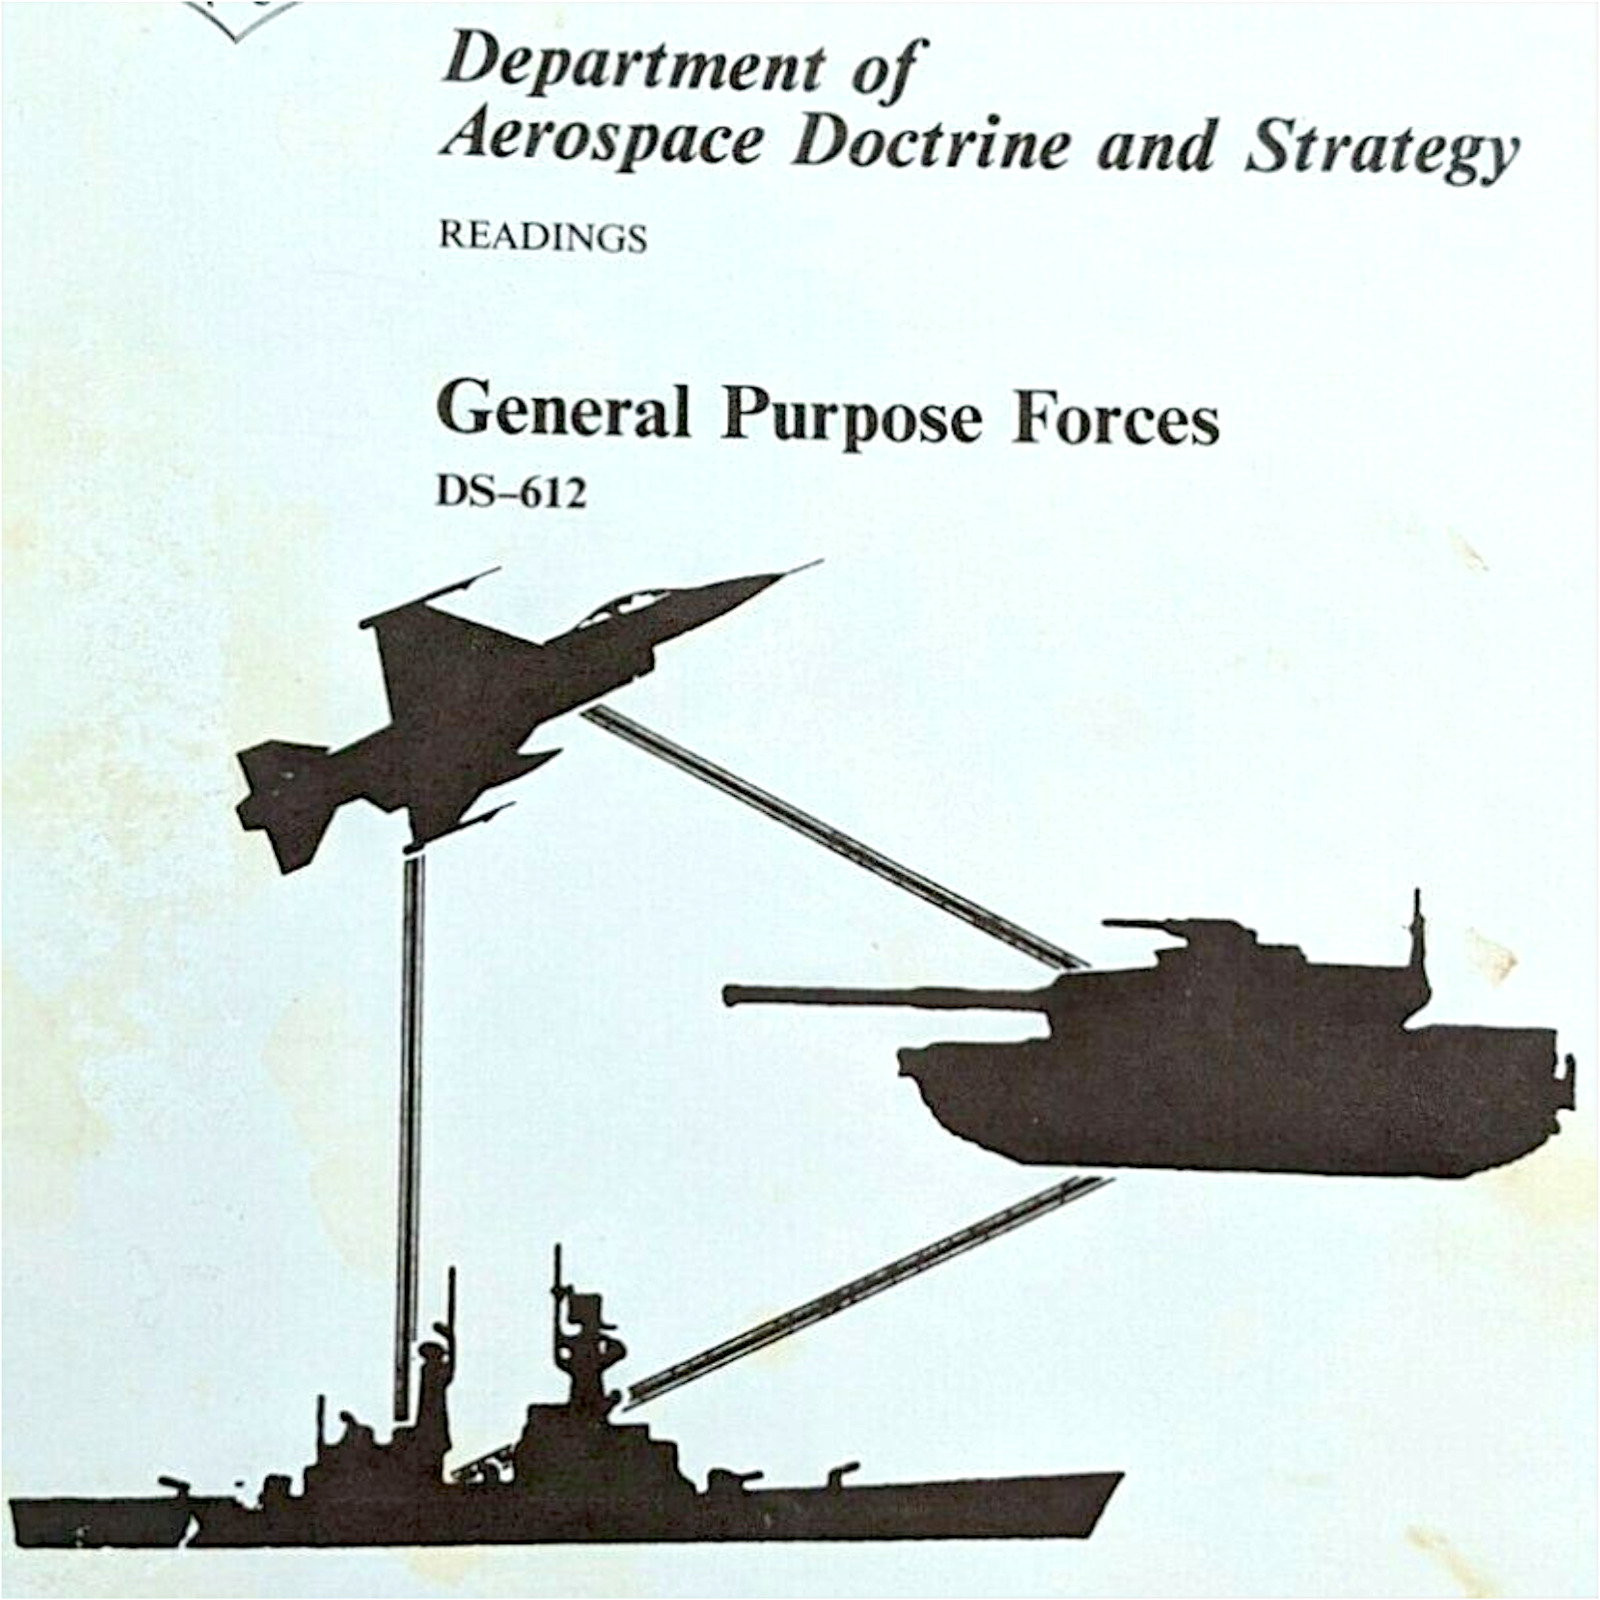 Air War College 1987 Course Book 2 Aerospace Doctrine General Purpose Forces